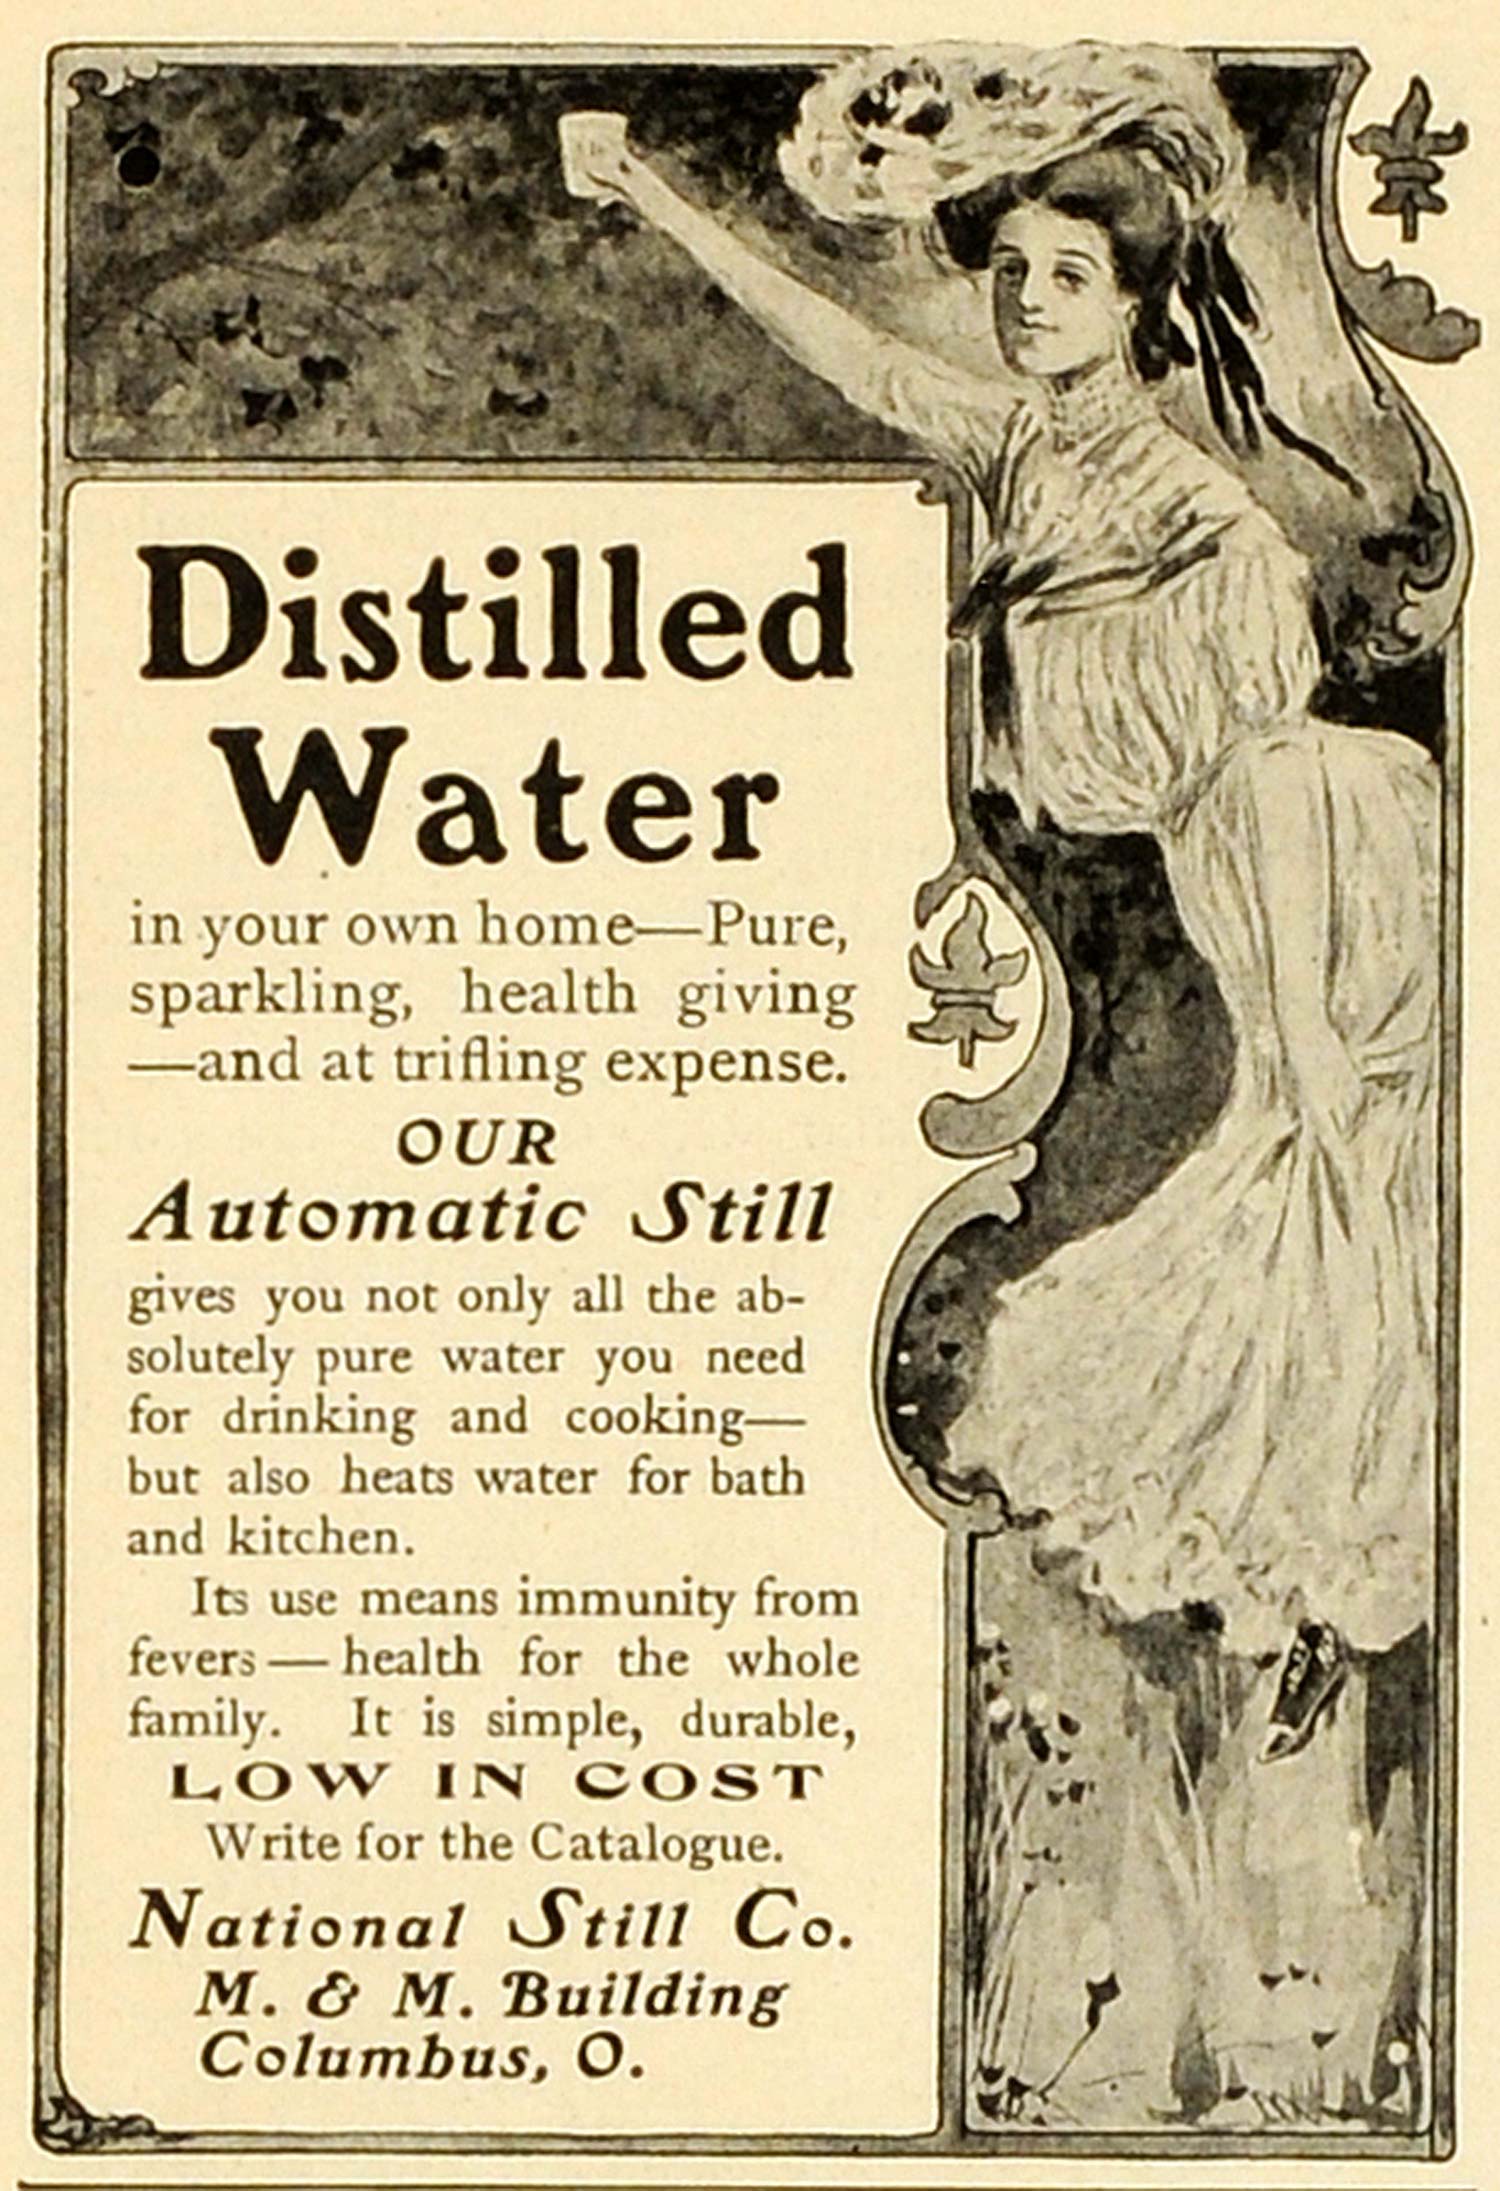 1902 Ad National Automatic Still Home Distilled Water Purification Columbus MX7